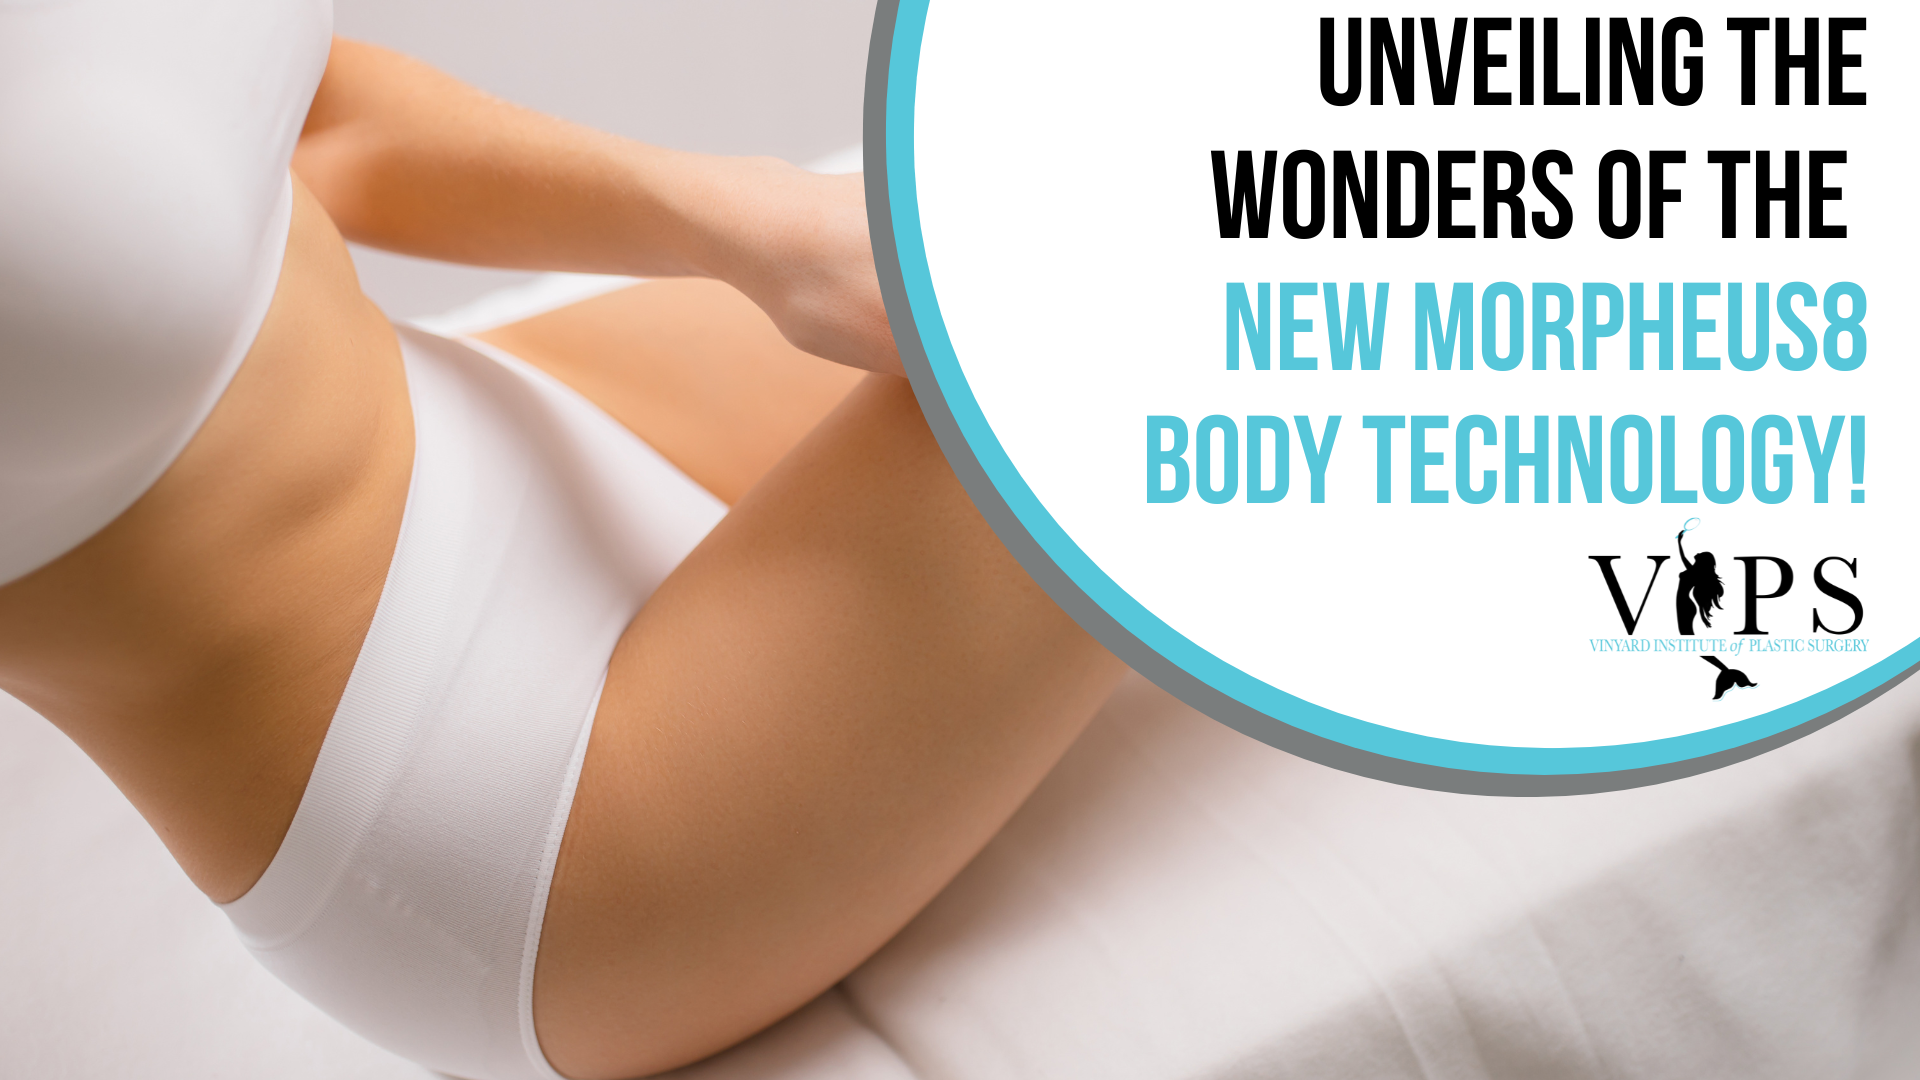 Unveiling the Wonders of the New Morpheus8 Body Technology!